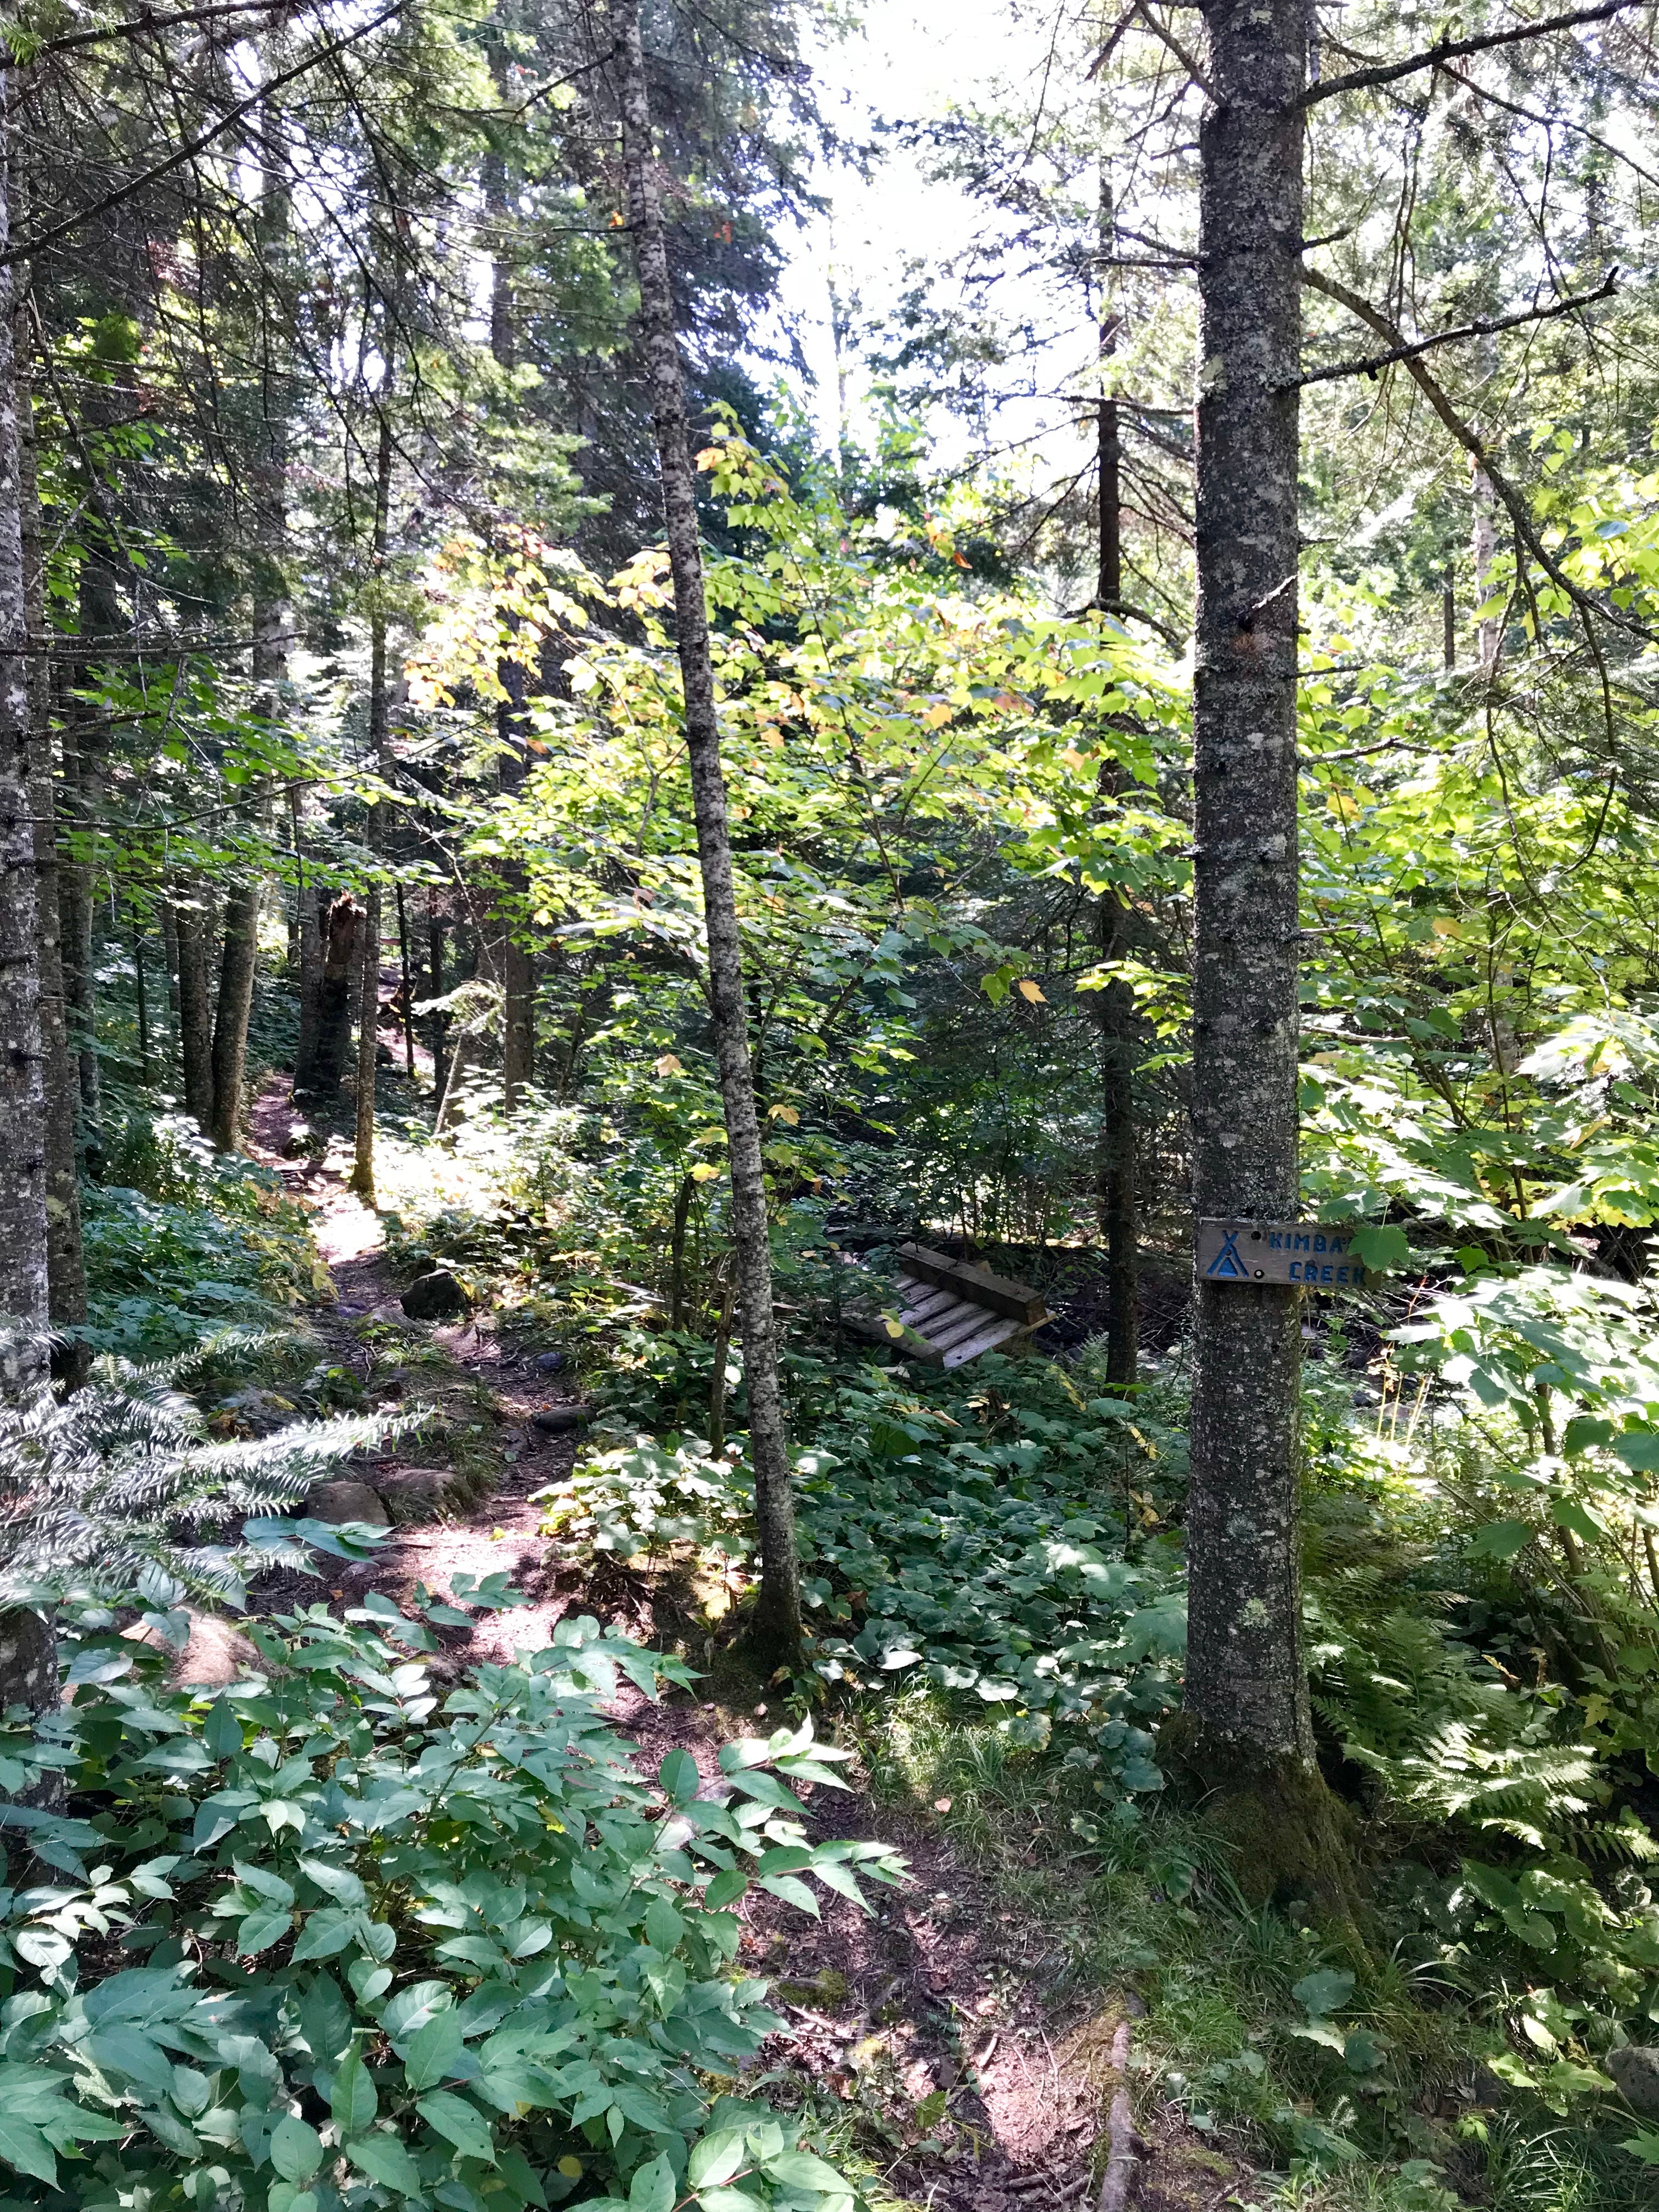 Camper submitted image from Kimball Creek, Superior Hiking Trail - 5